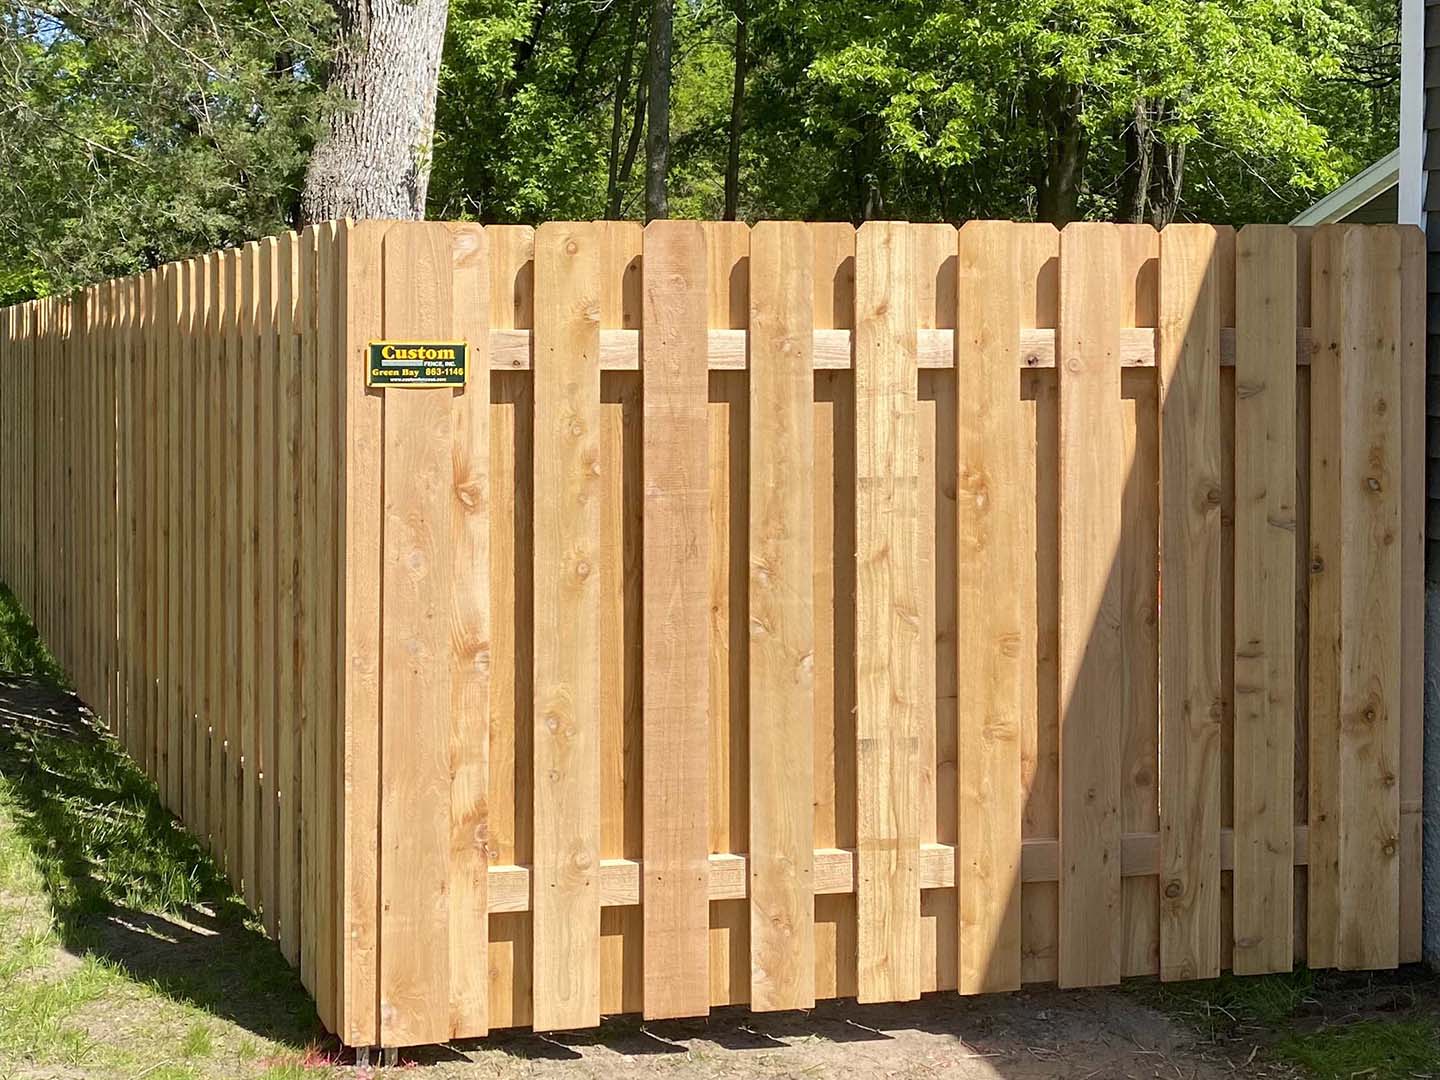 Photo of a Northeastern Wisconsin wood fence